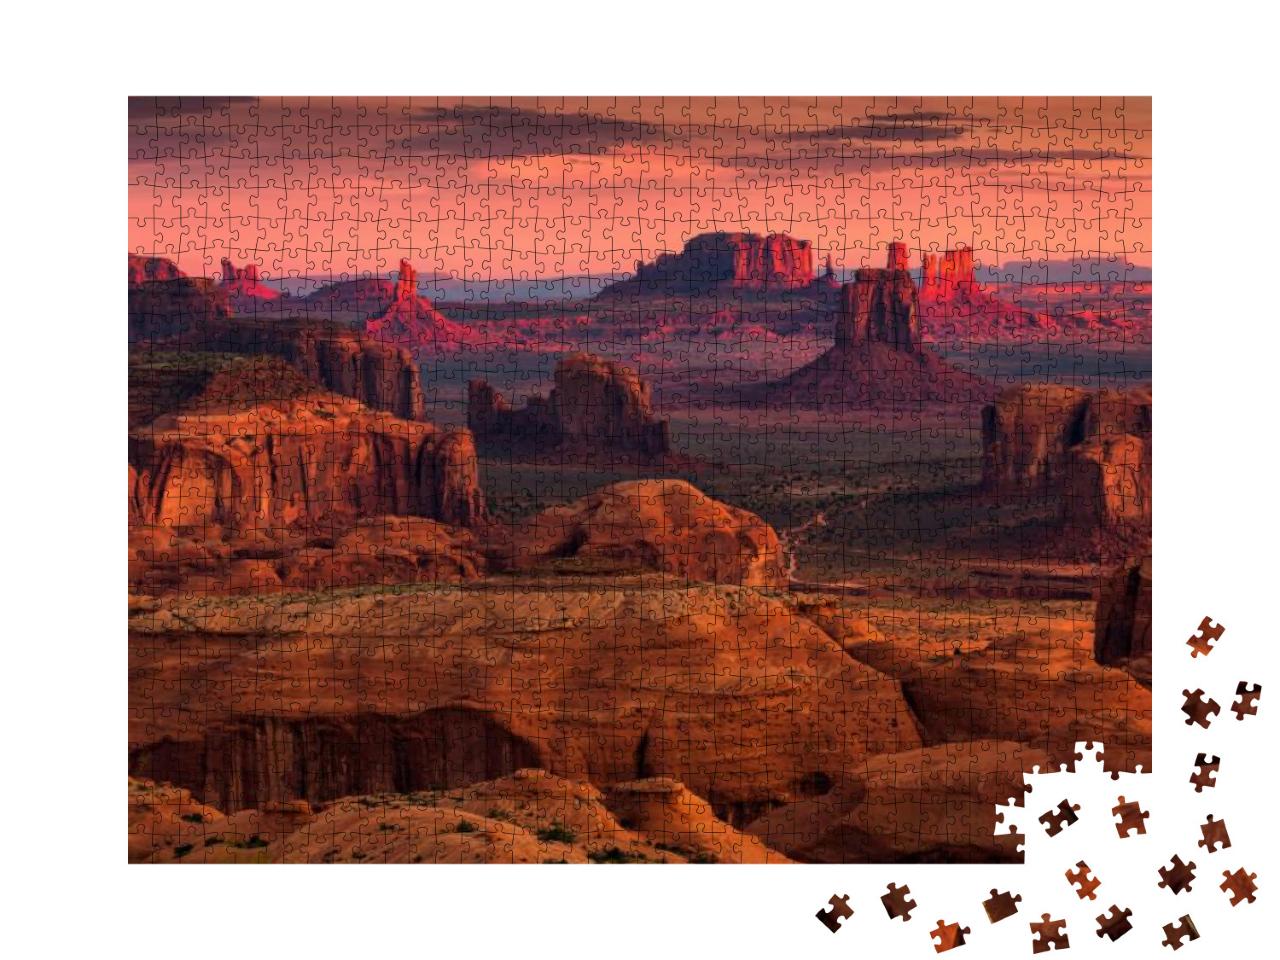 Sunrise in Hunts Mesa Navajo Tribal Majesty Place Near Mo... Jigsaw Puzzle with 1000 pieces